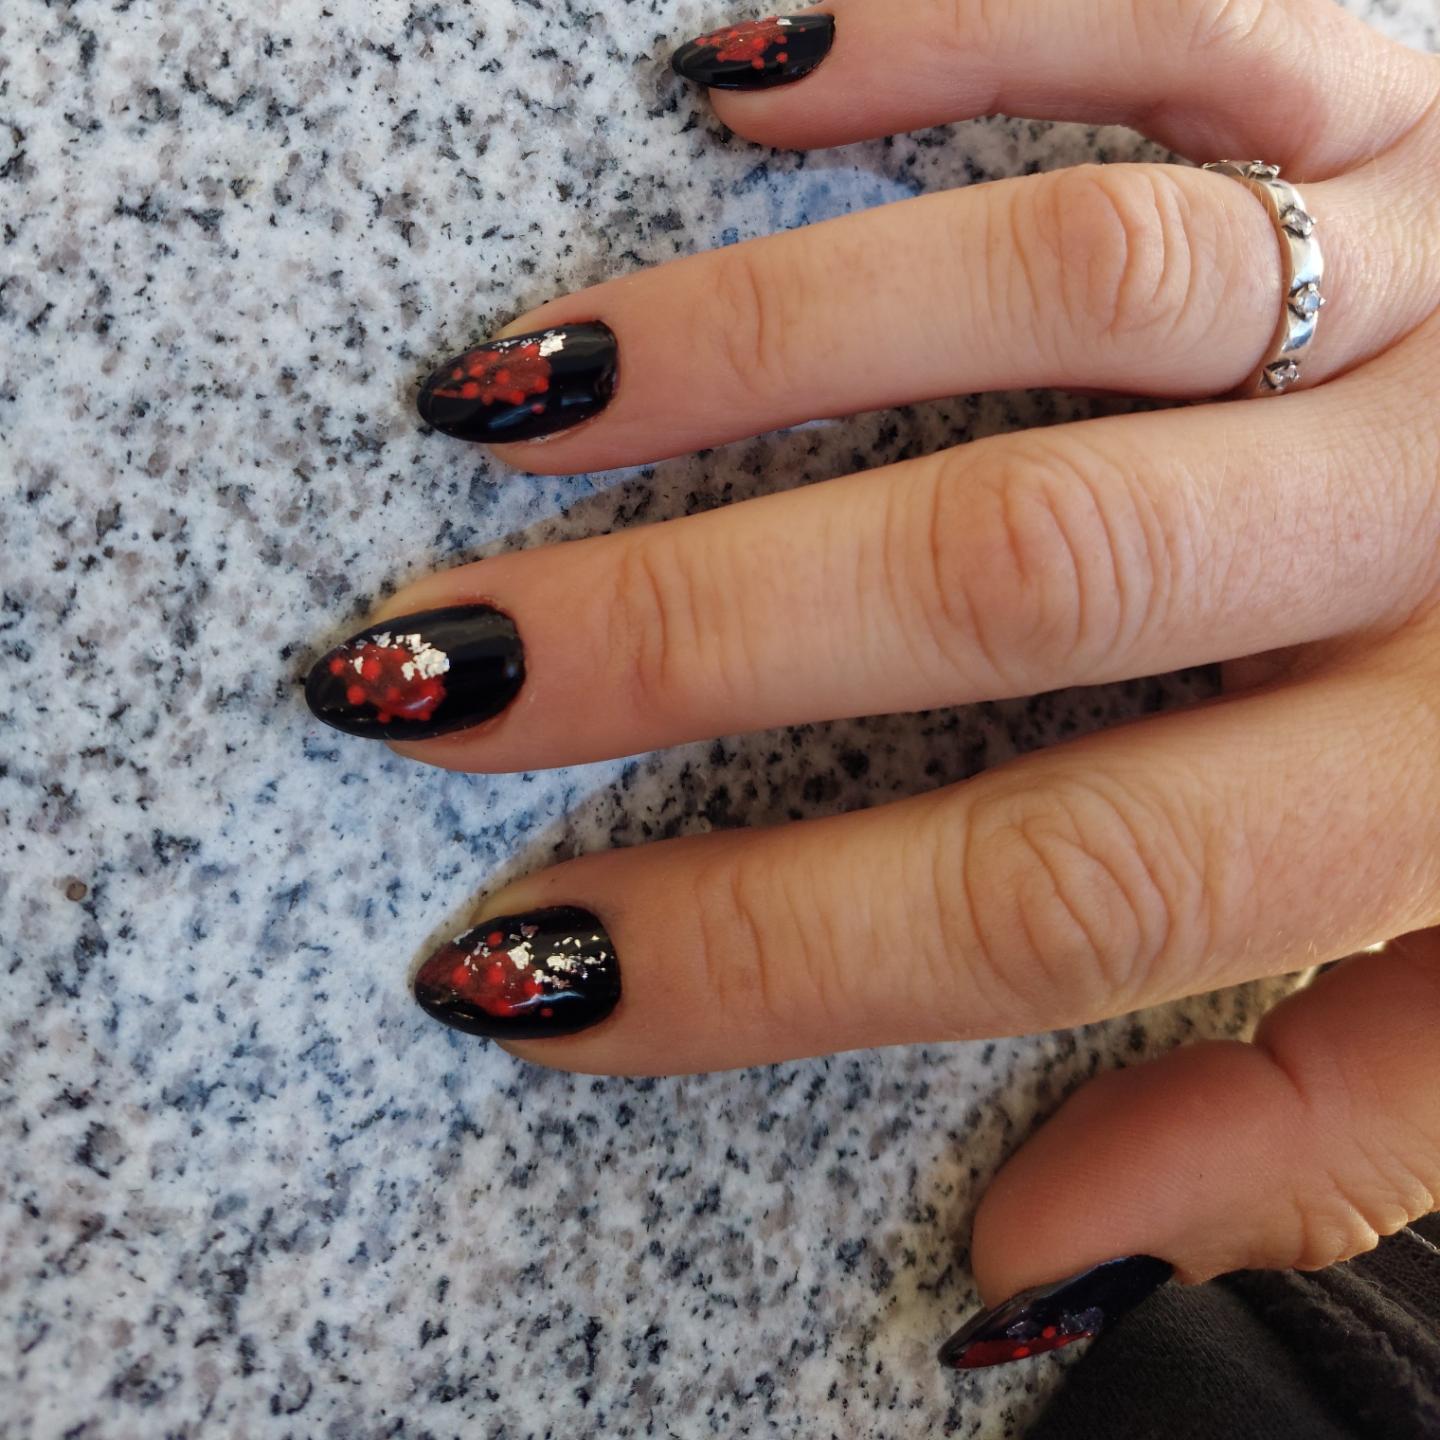  Wanna shine like a star? If your answer is yes, you have to try this design out. It's not hard, so you can create this look by yourself. Silver and red particles can be splashed on your black nails to get this simple but chic nail design.